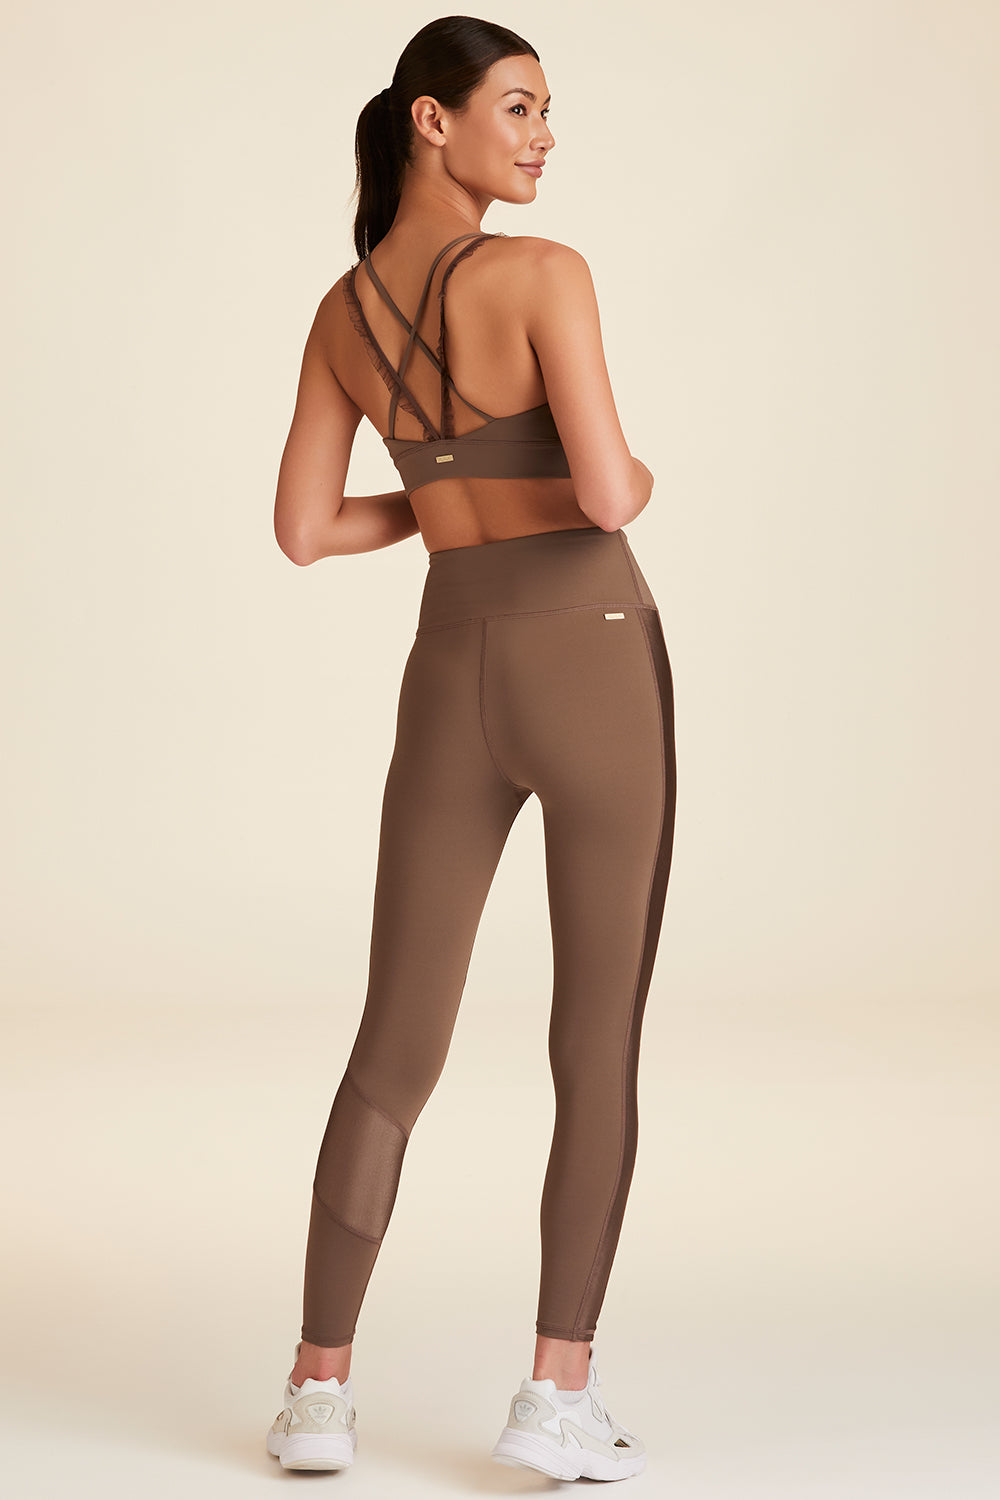 Shop Prisma's Brown Capri Leggings for Comfortable and Stylish Workout Wear